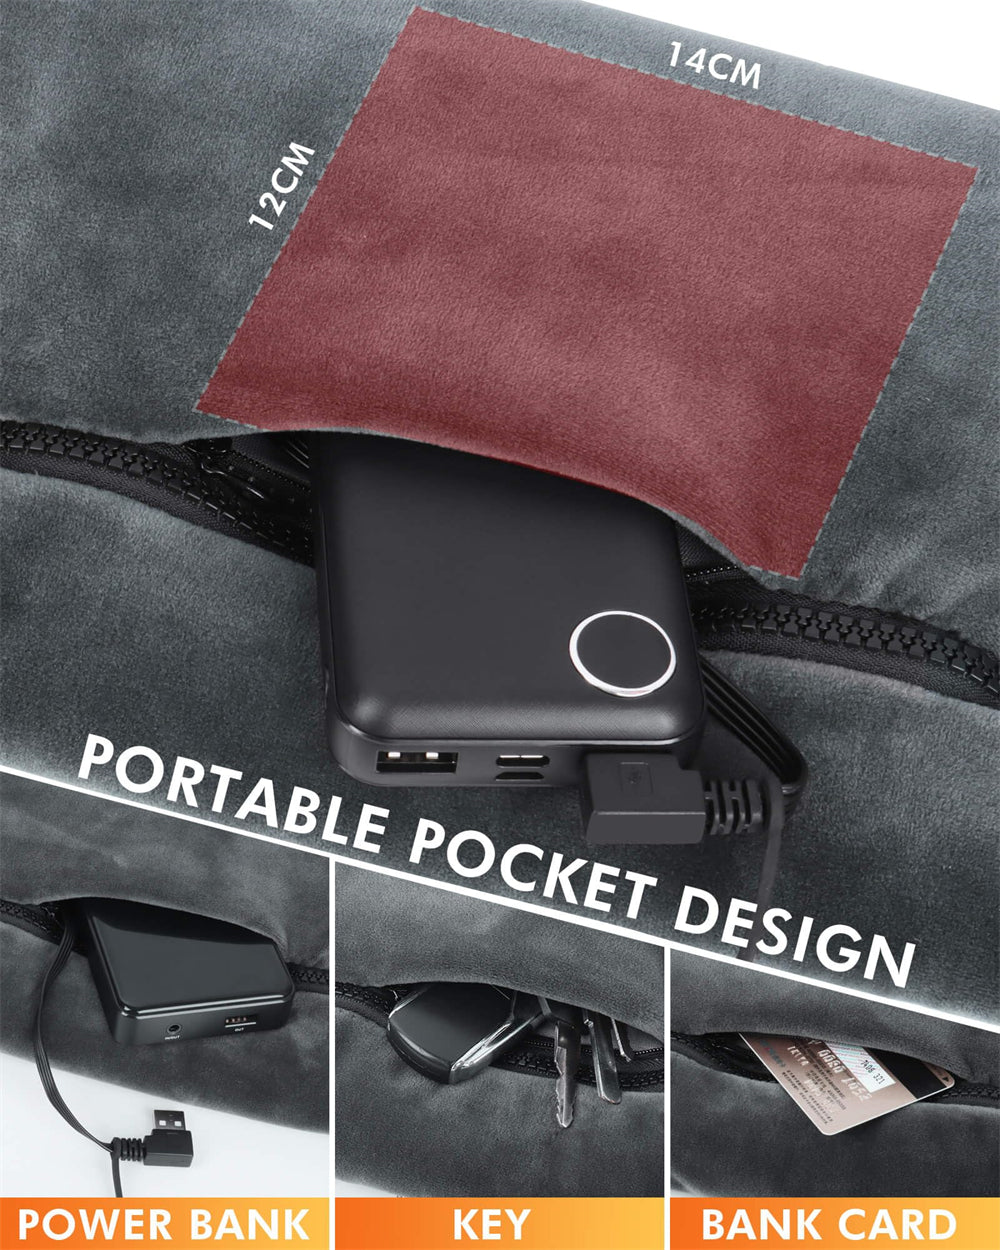 portable pocket design for power bank, phone, keys or other devices 